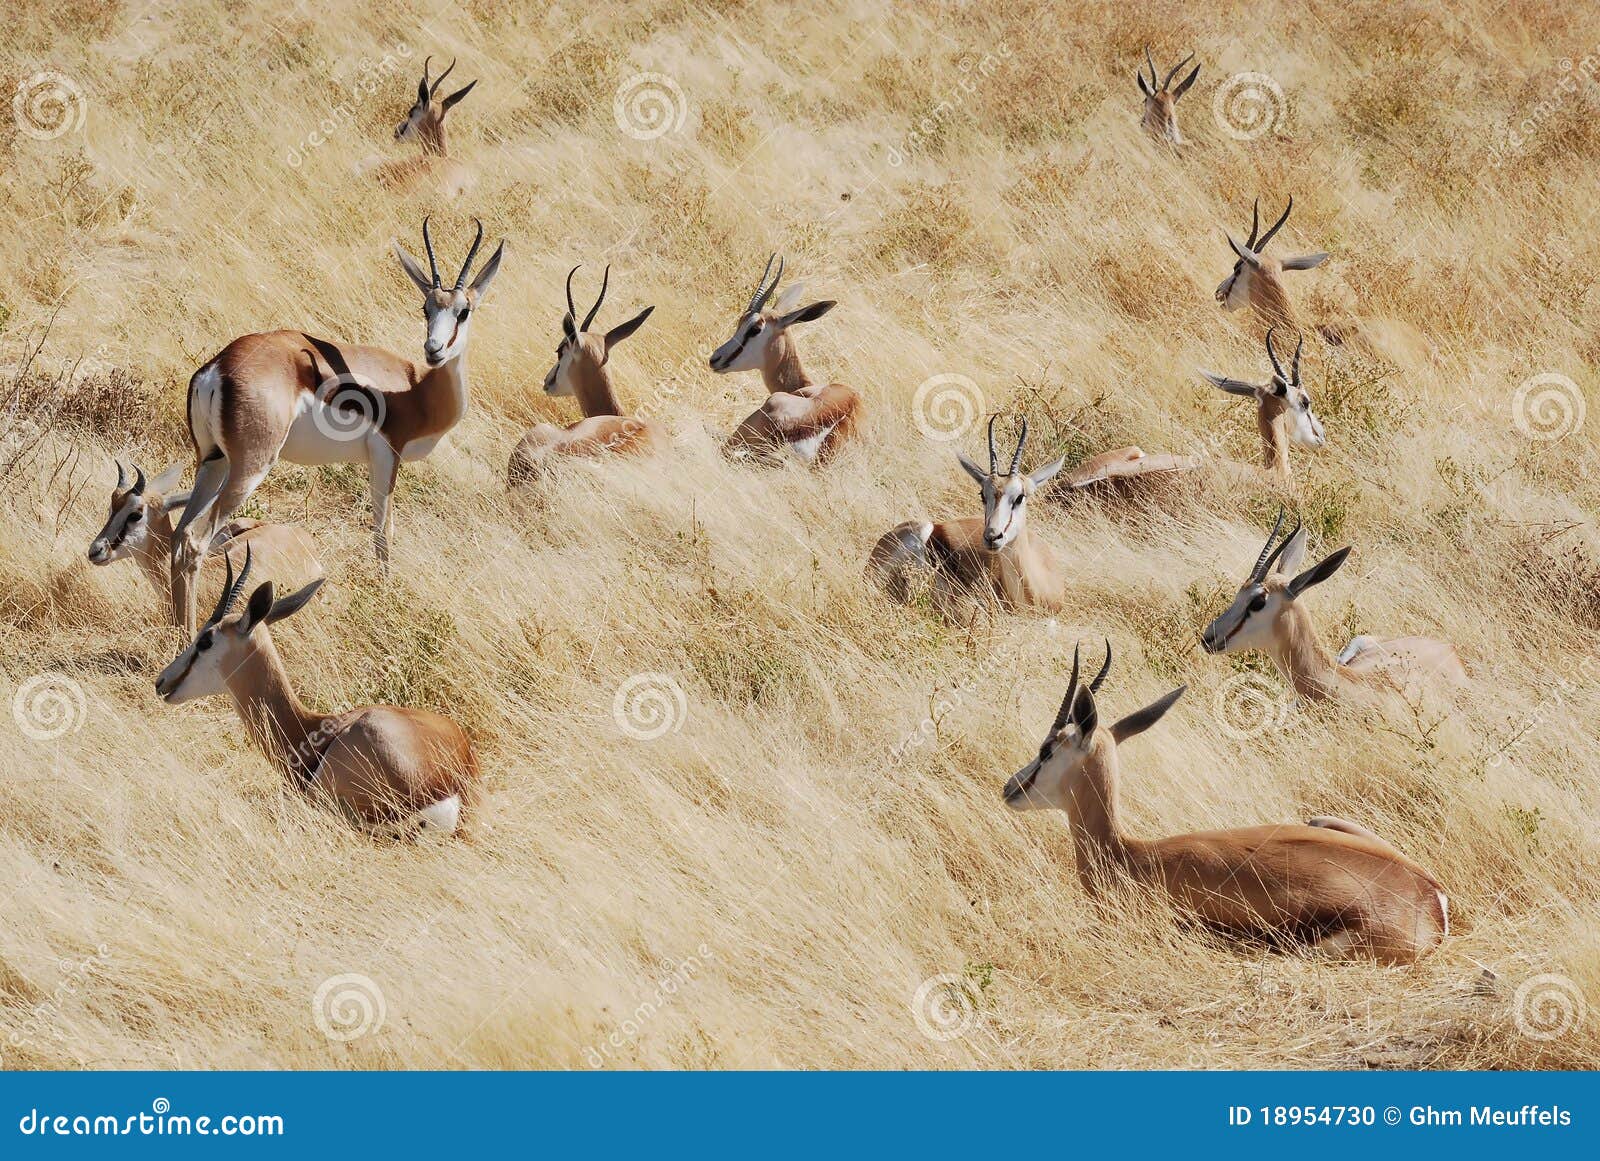 group springbok lying in the grass, namibia